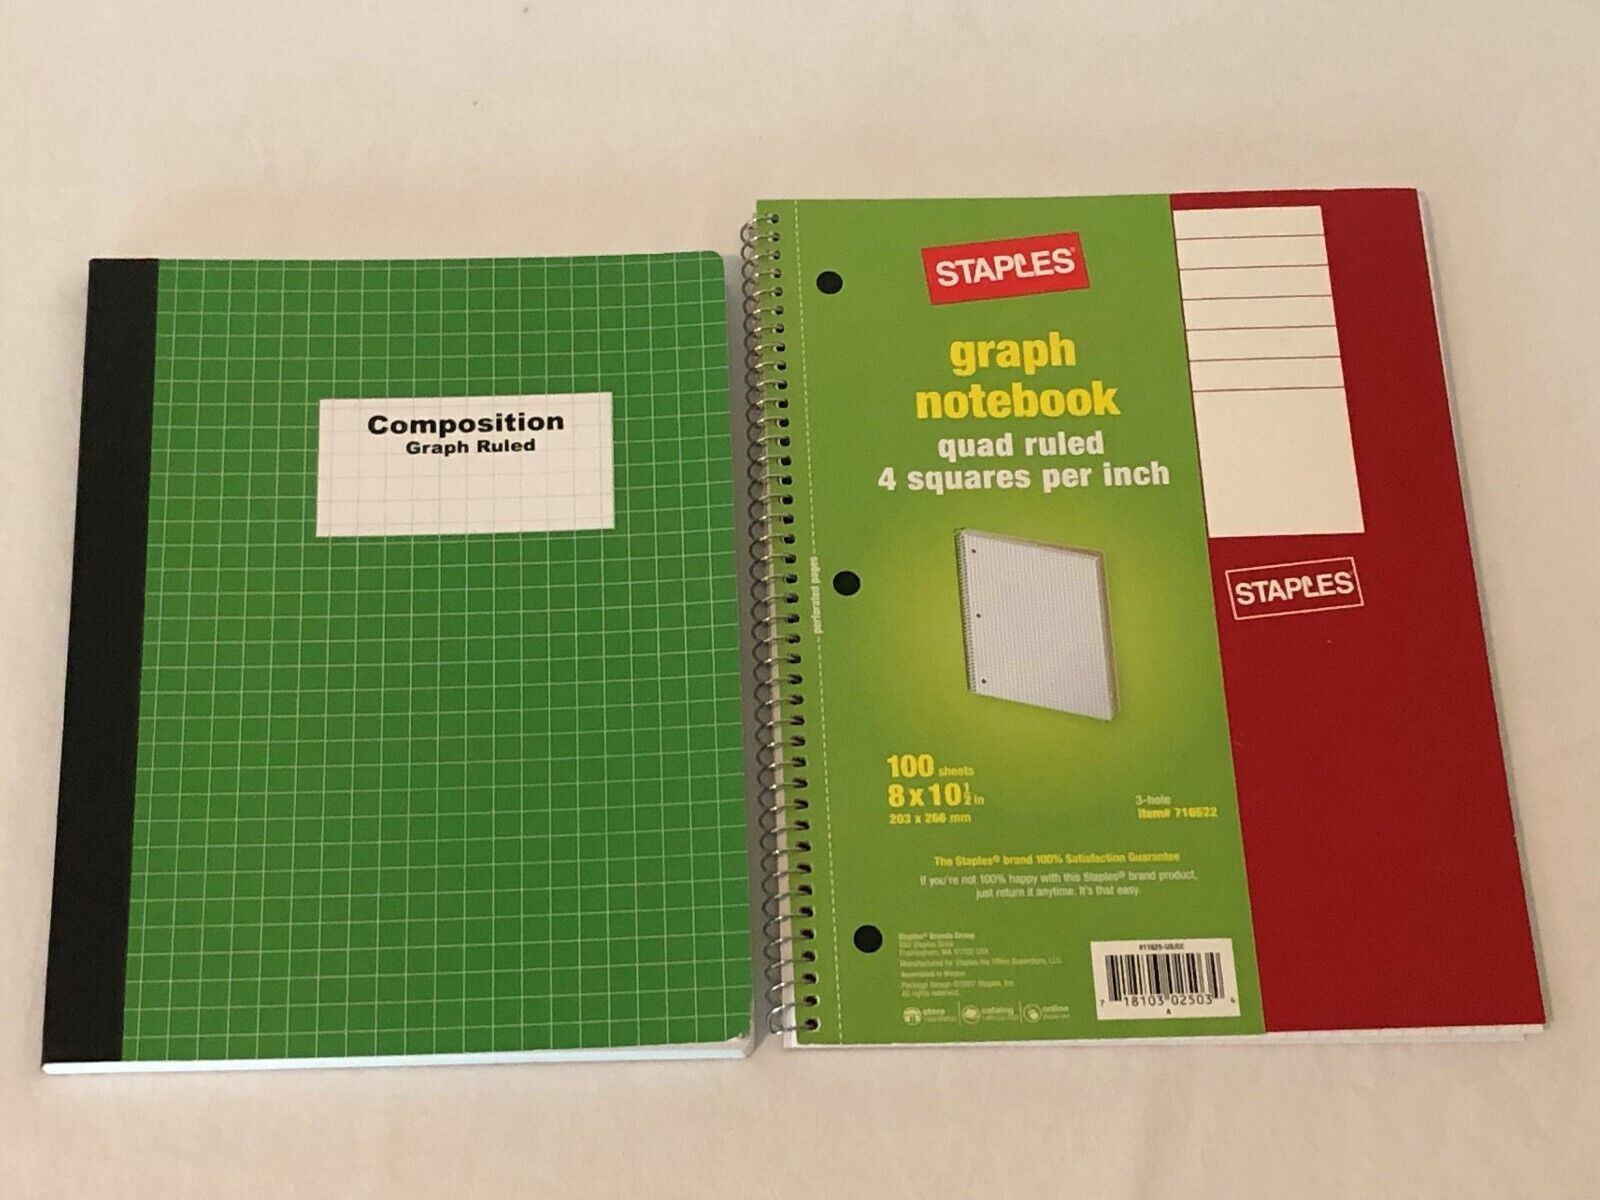 Spiral Quad Ruled Engineers Graph Ruled Composition Notebook S...